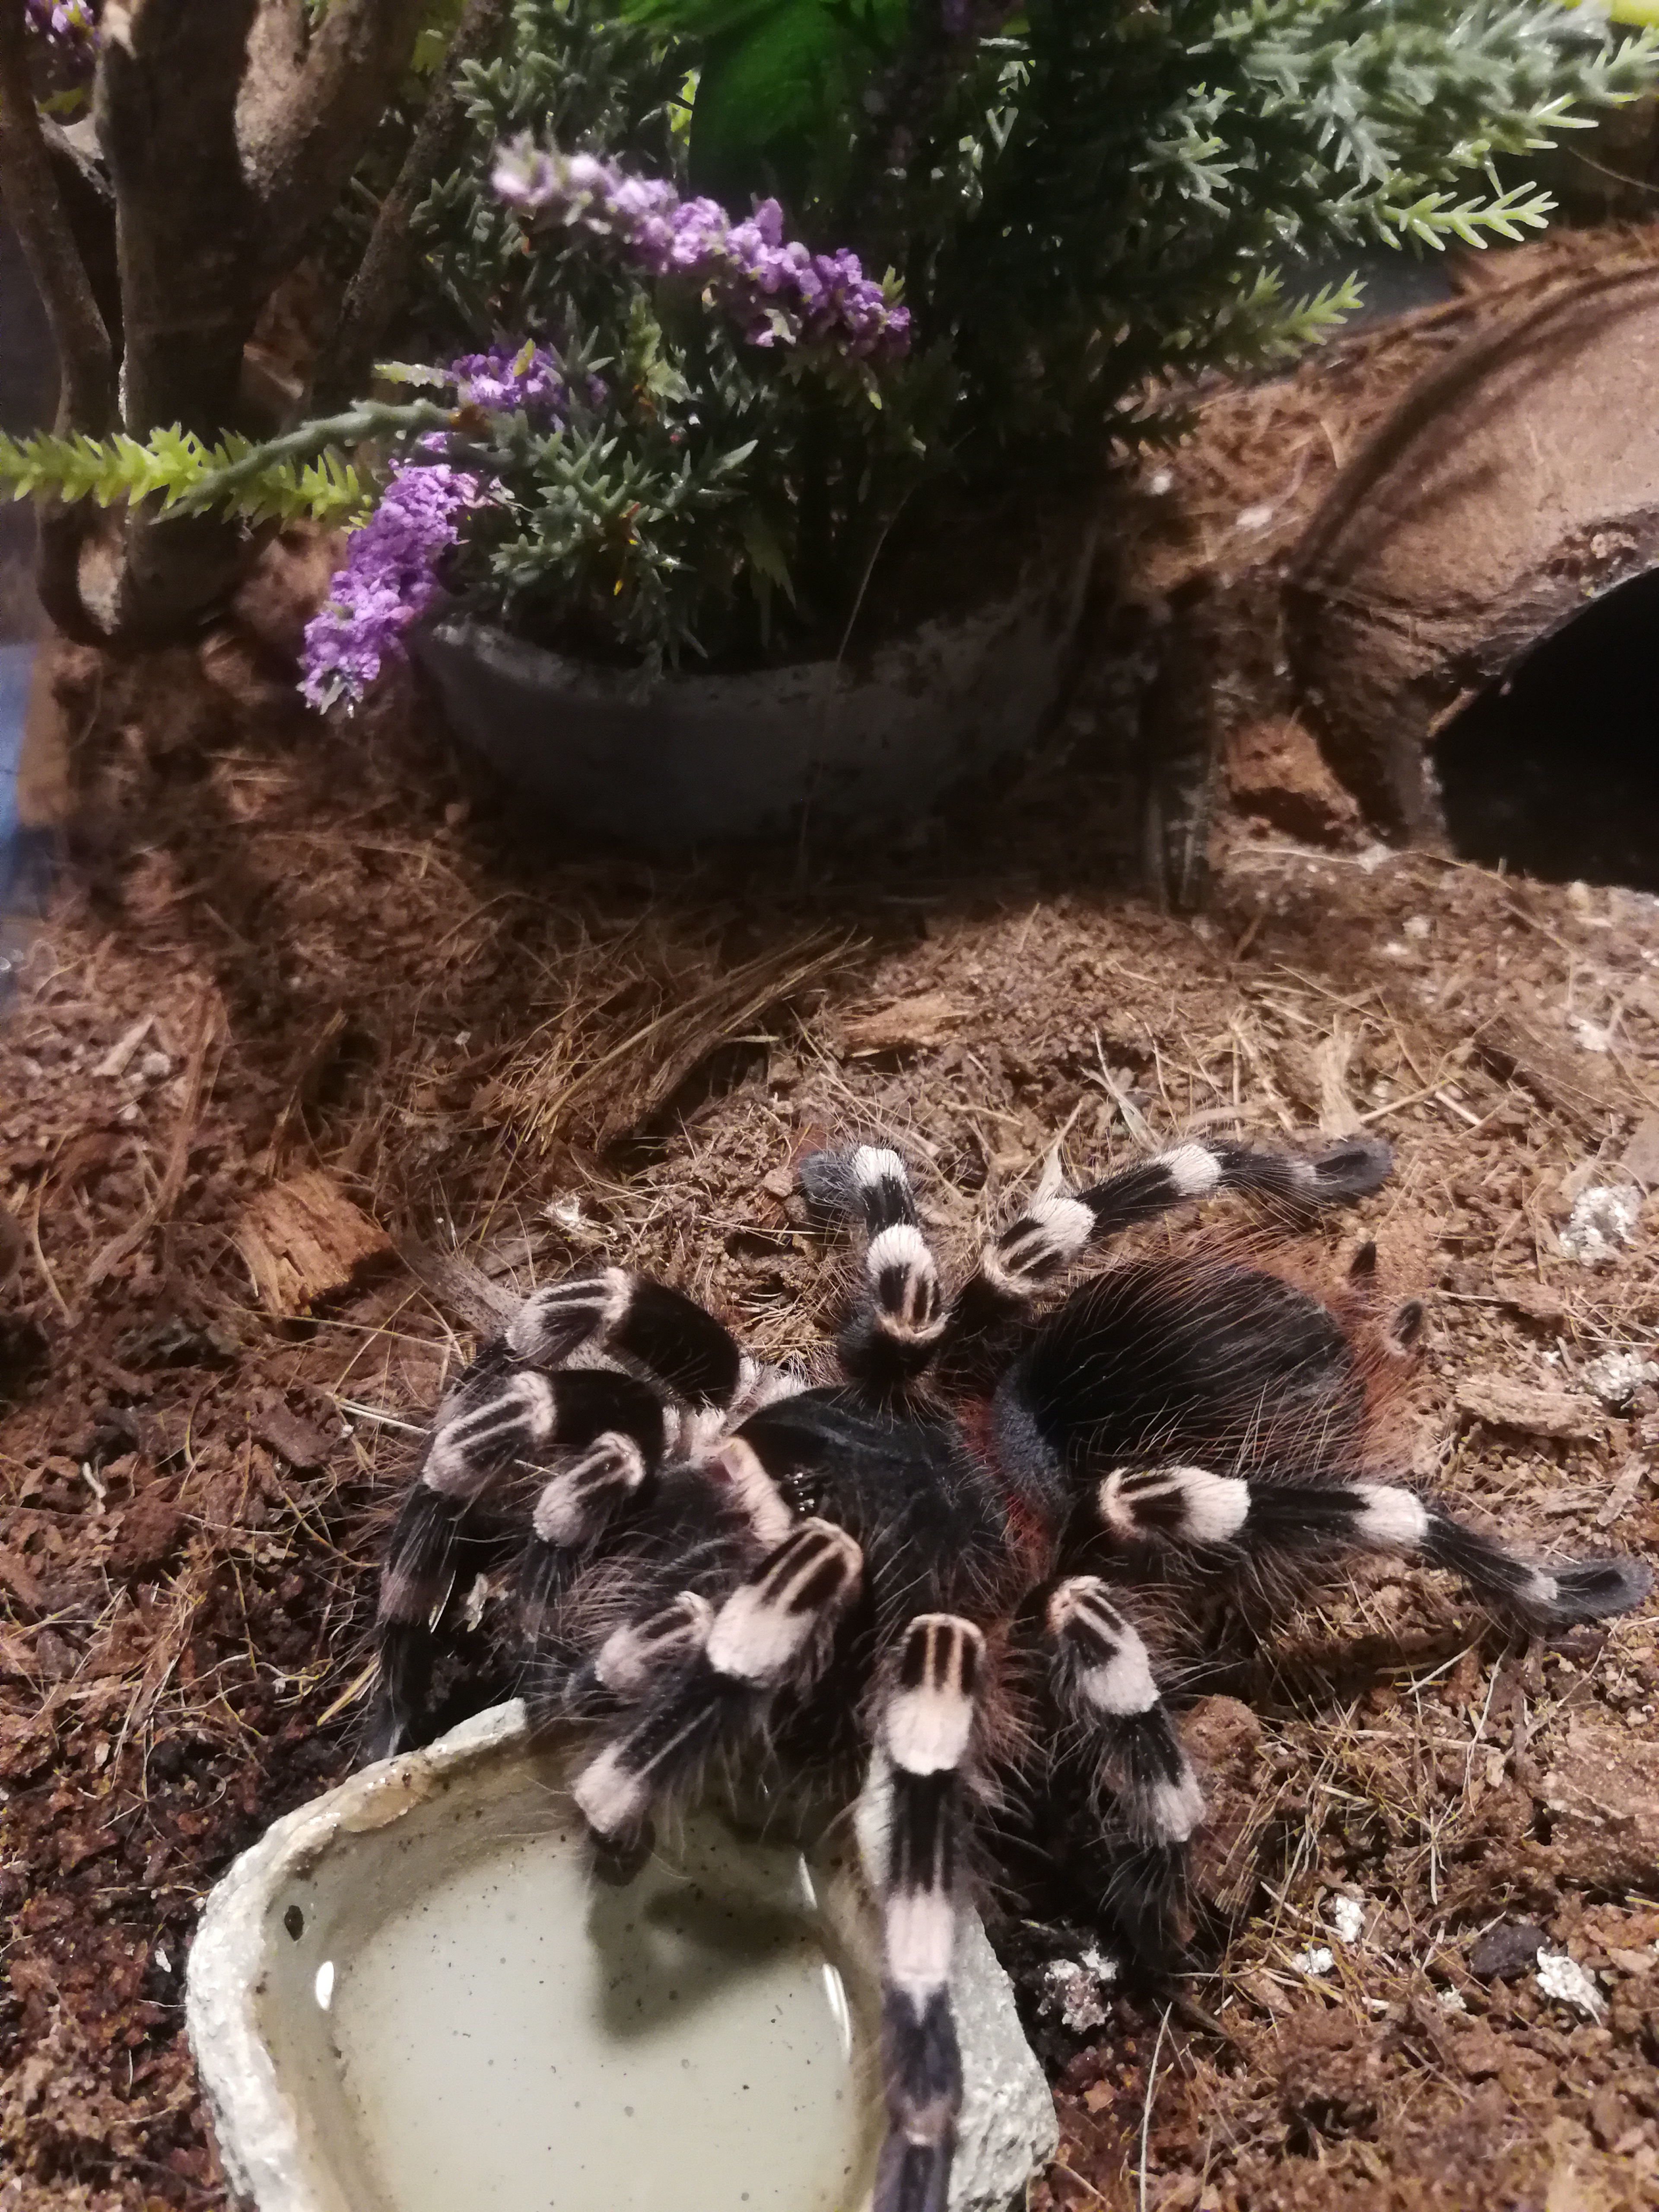 My acanthoscurria geniculata drinking